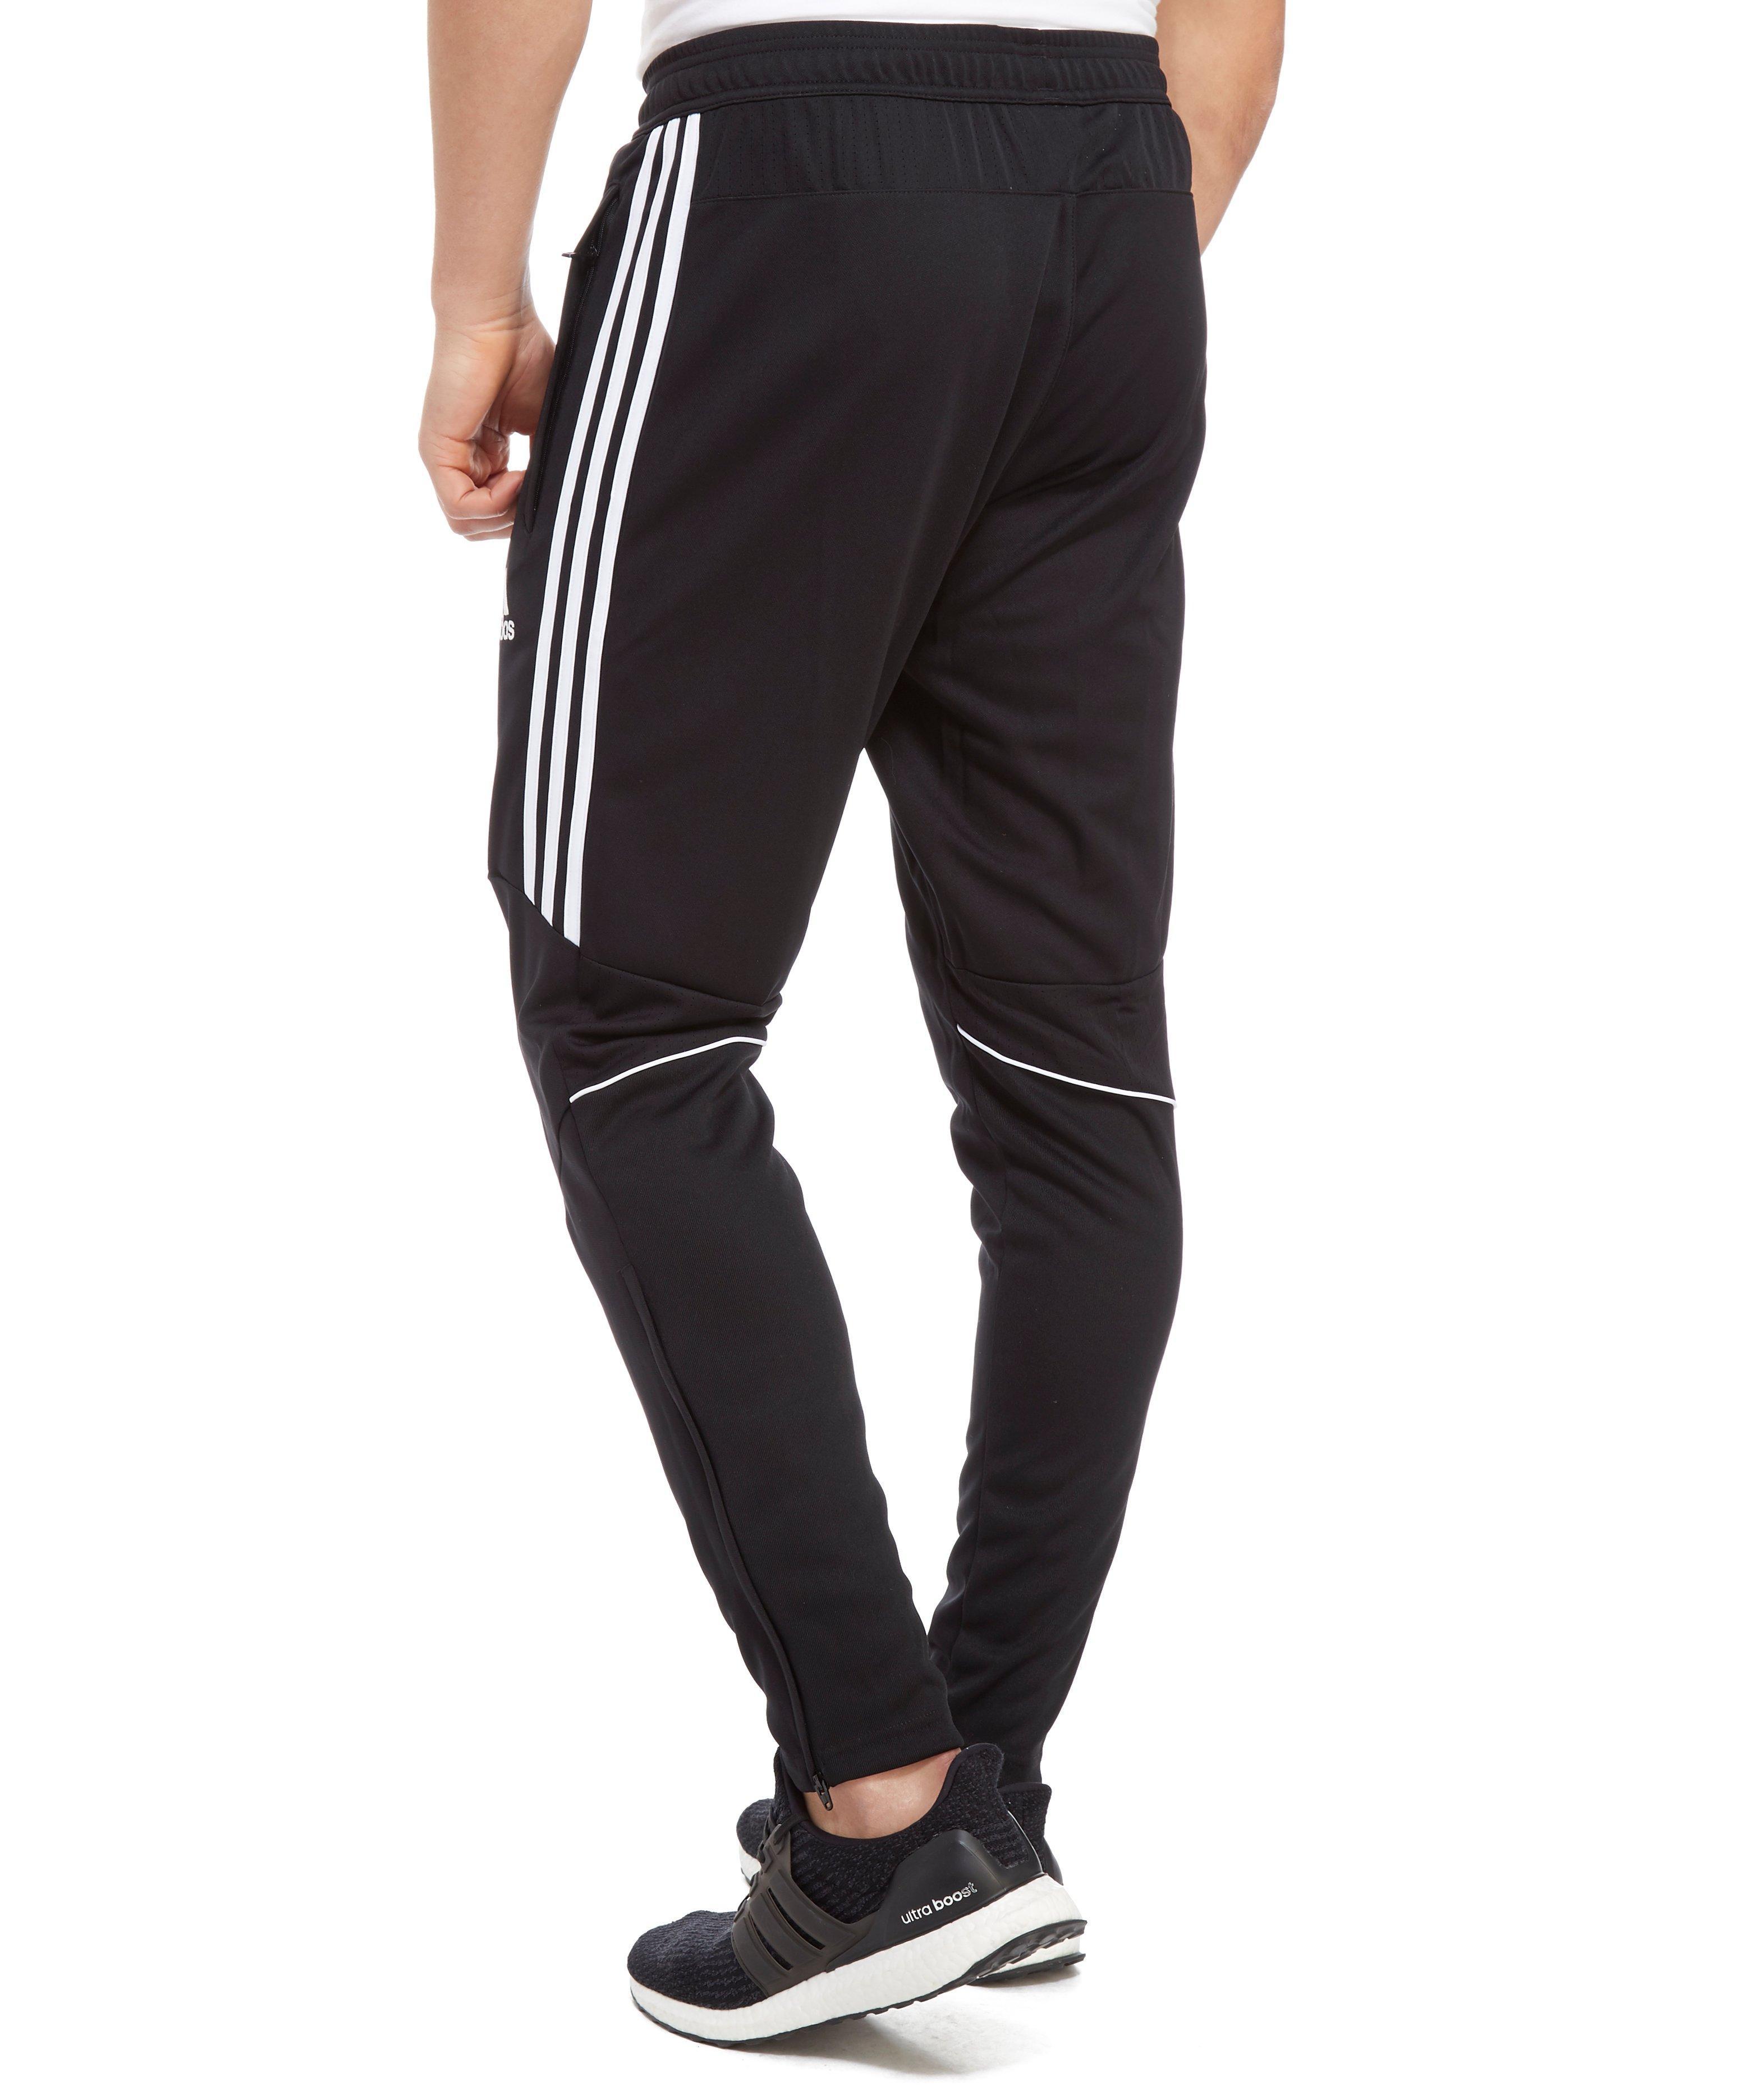 adidas Synthetic Tango Pants in Black/White (Black) for Men - Lyst